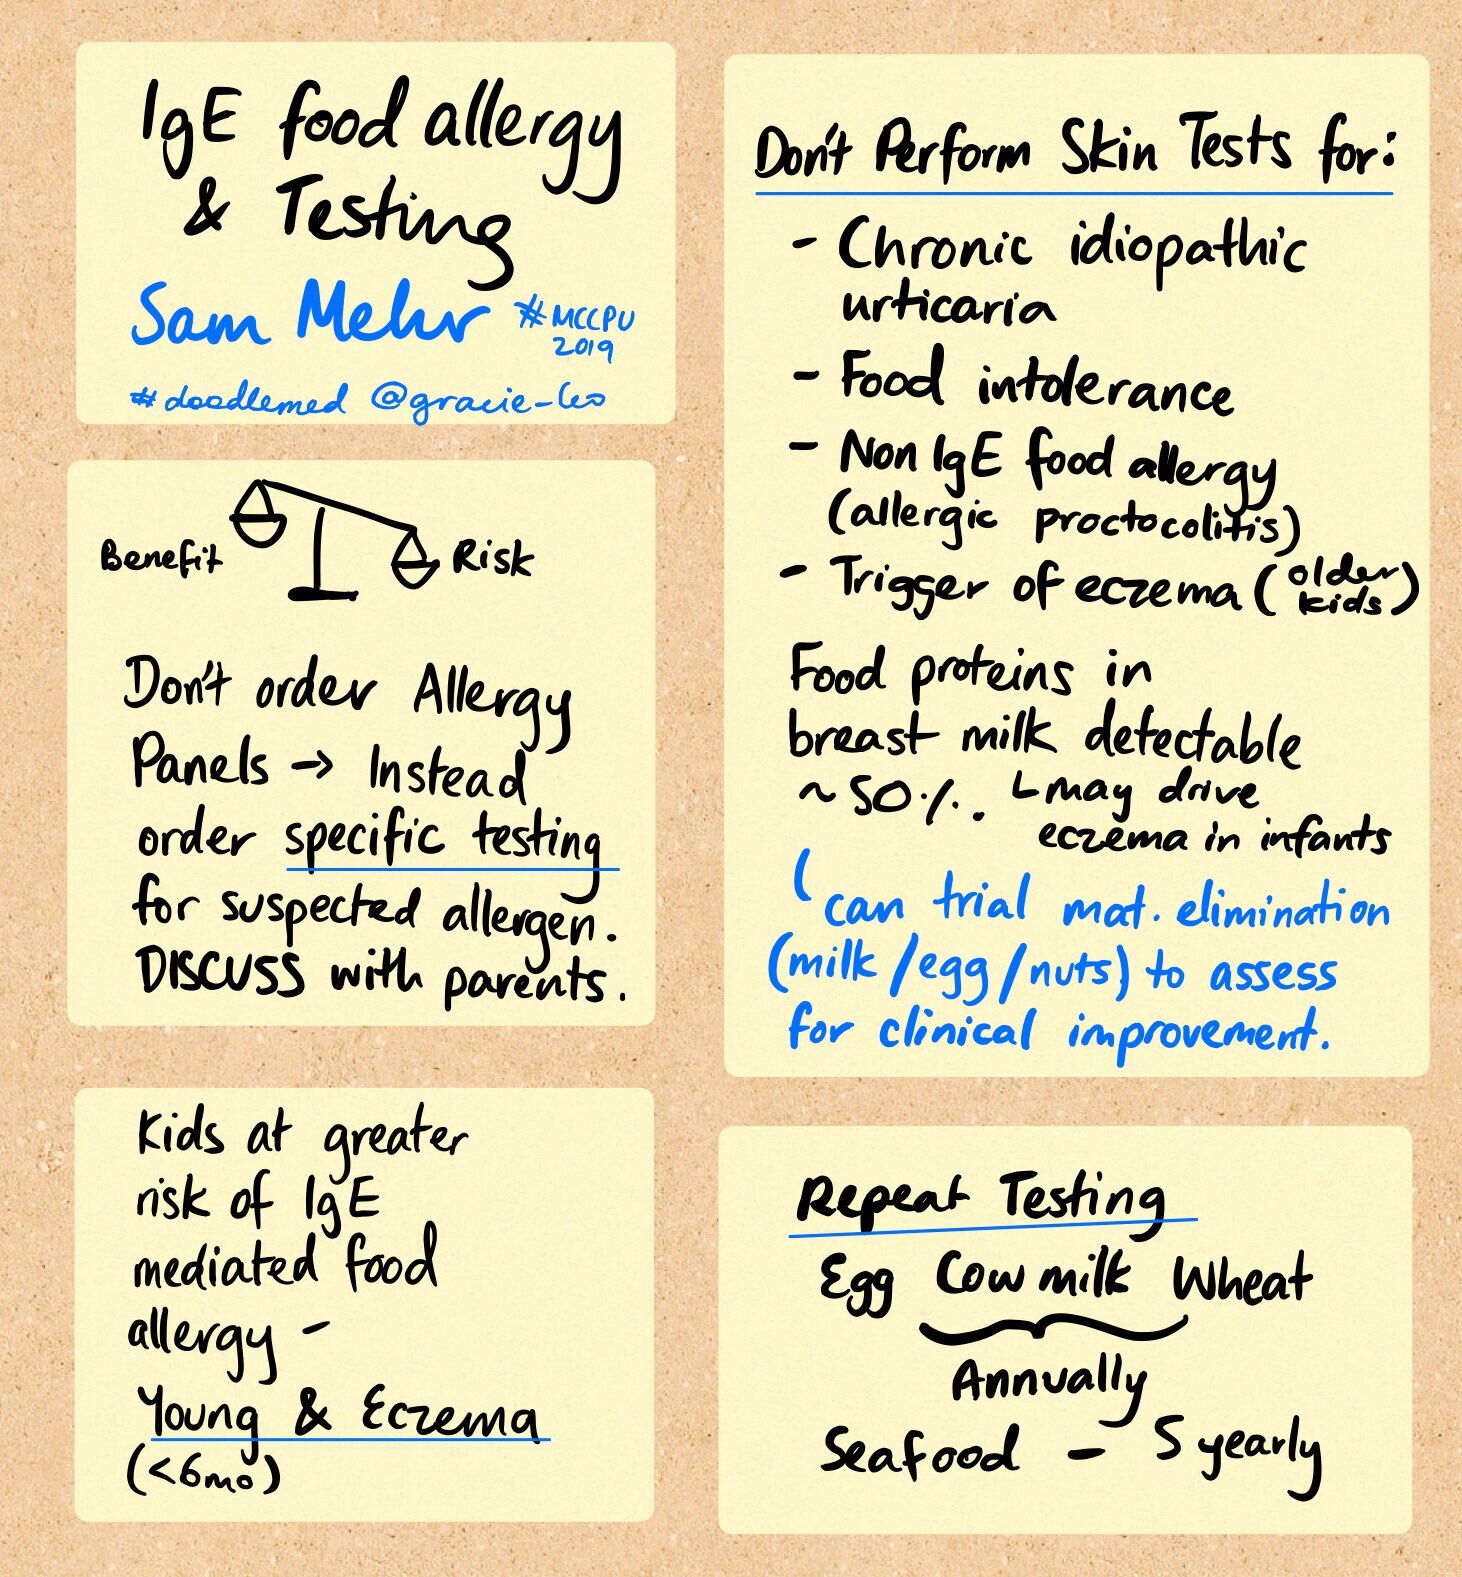 IgE food allergy and Testing with Sam Mehr